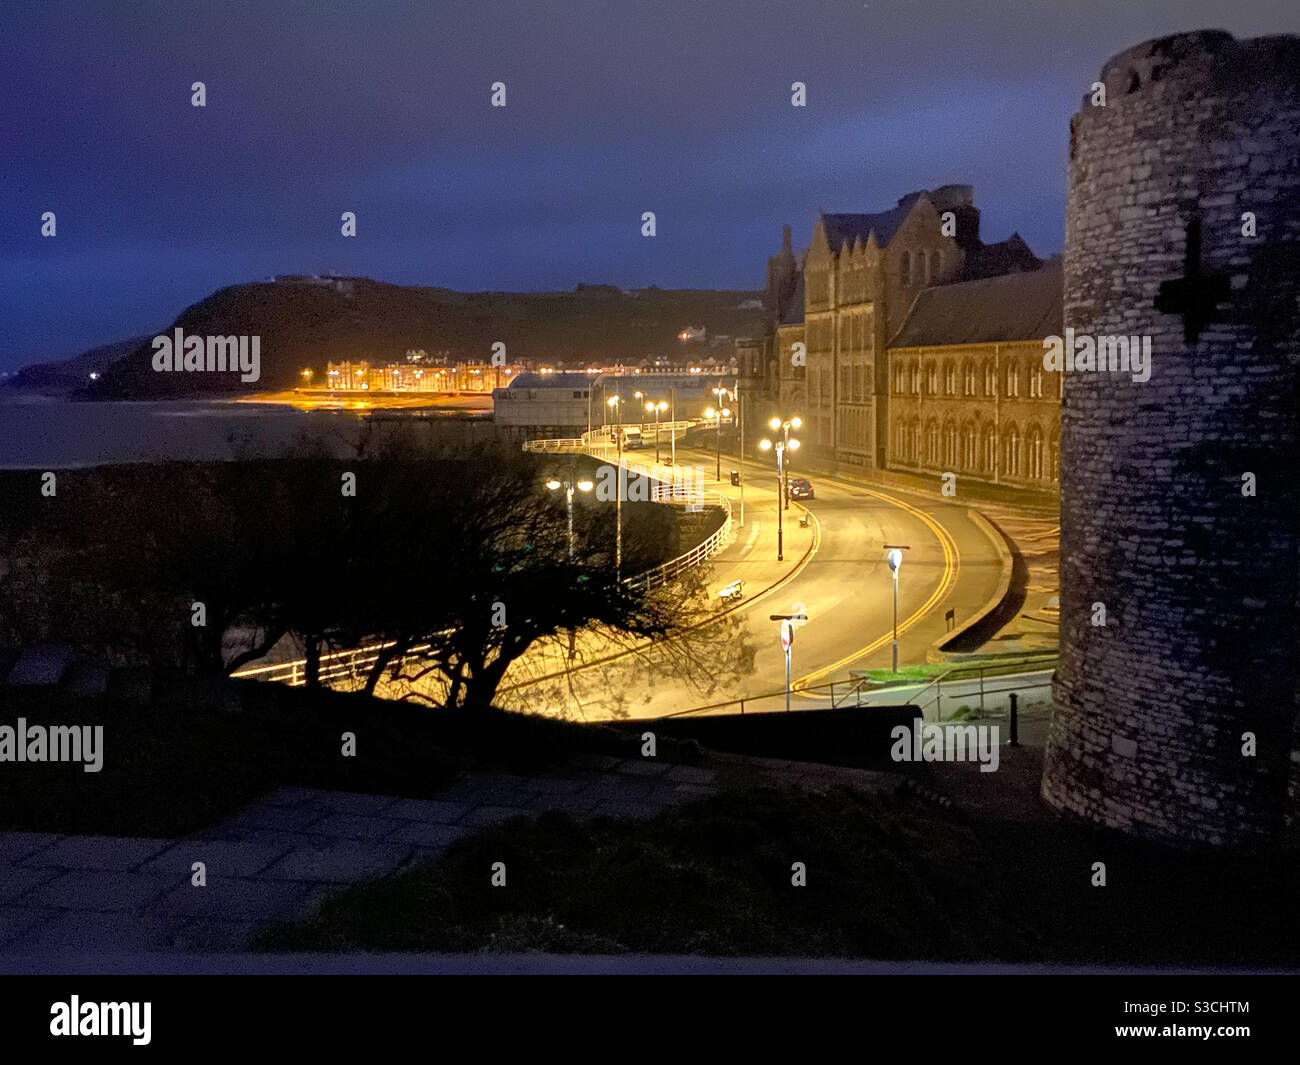 Aberystwyth, West Wales, UK. Sunday 17th January 2021. Weather: a cold morning In Aberystwyth as the streets light up golden by streetlights. Photo Credit ©️ Rose Voon / Alamy Live News. Stock Photo